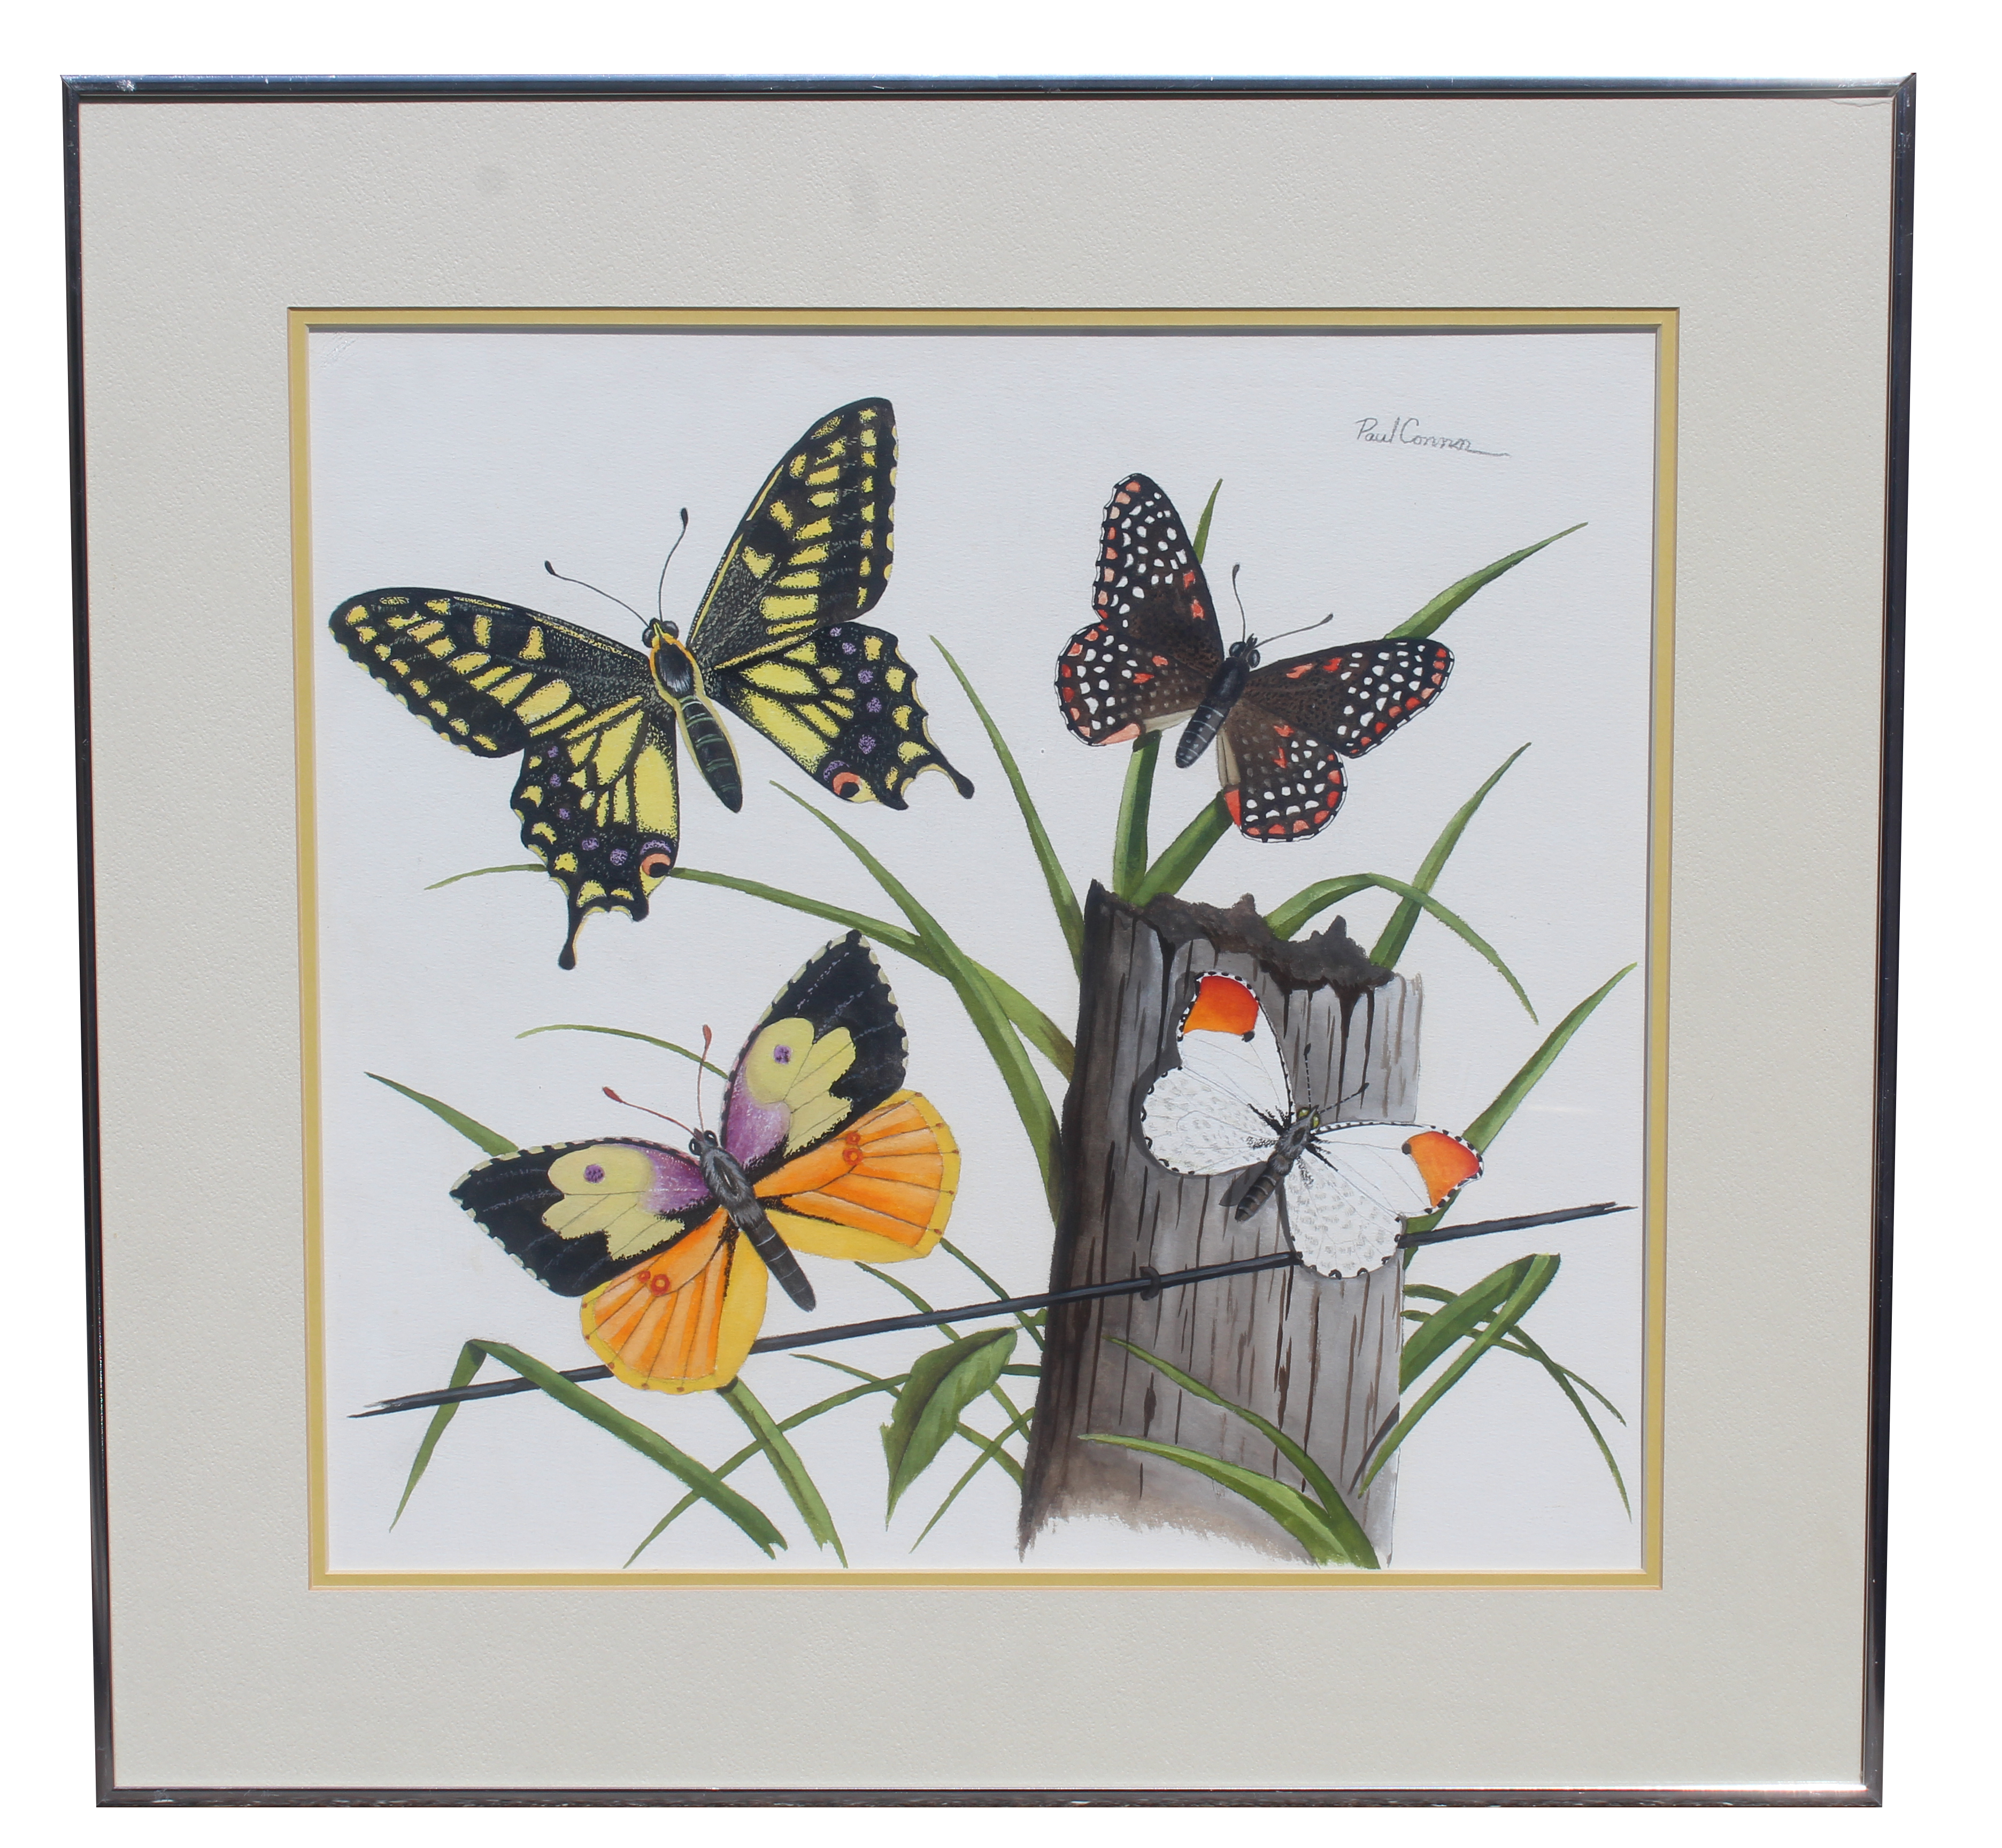 Paul Connor (20th C) "Butterflies" - Image 5 of 6